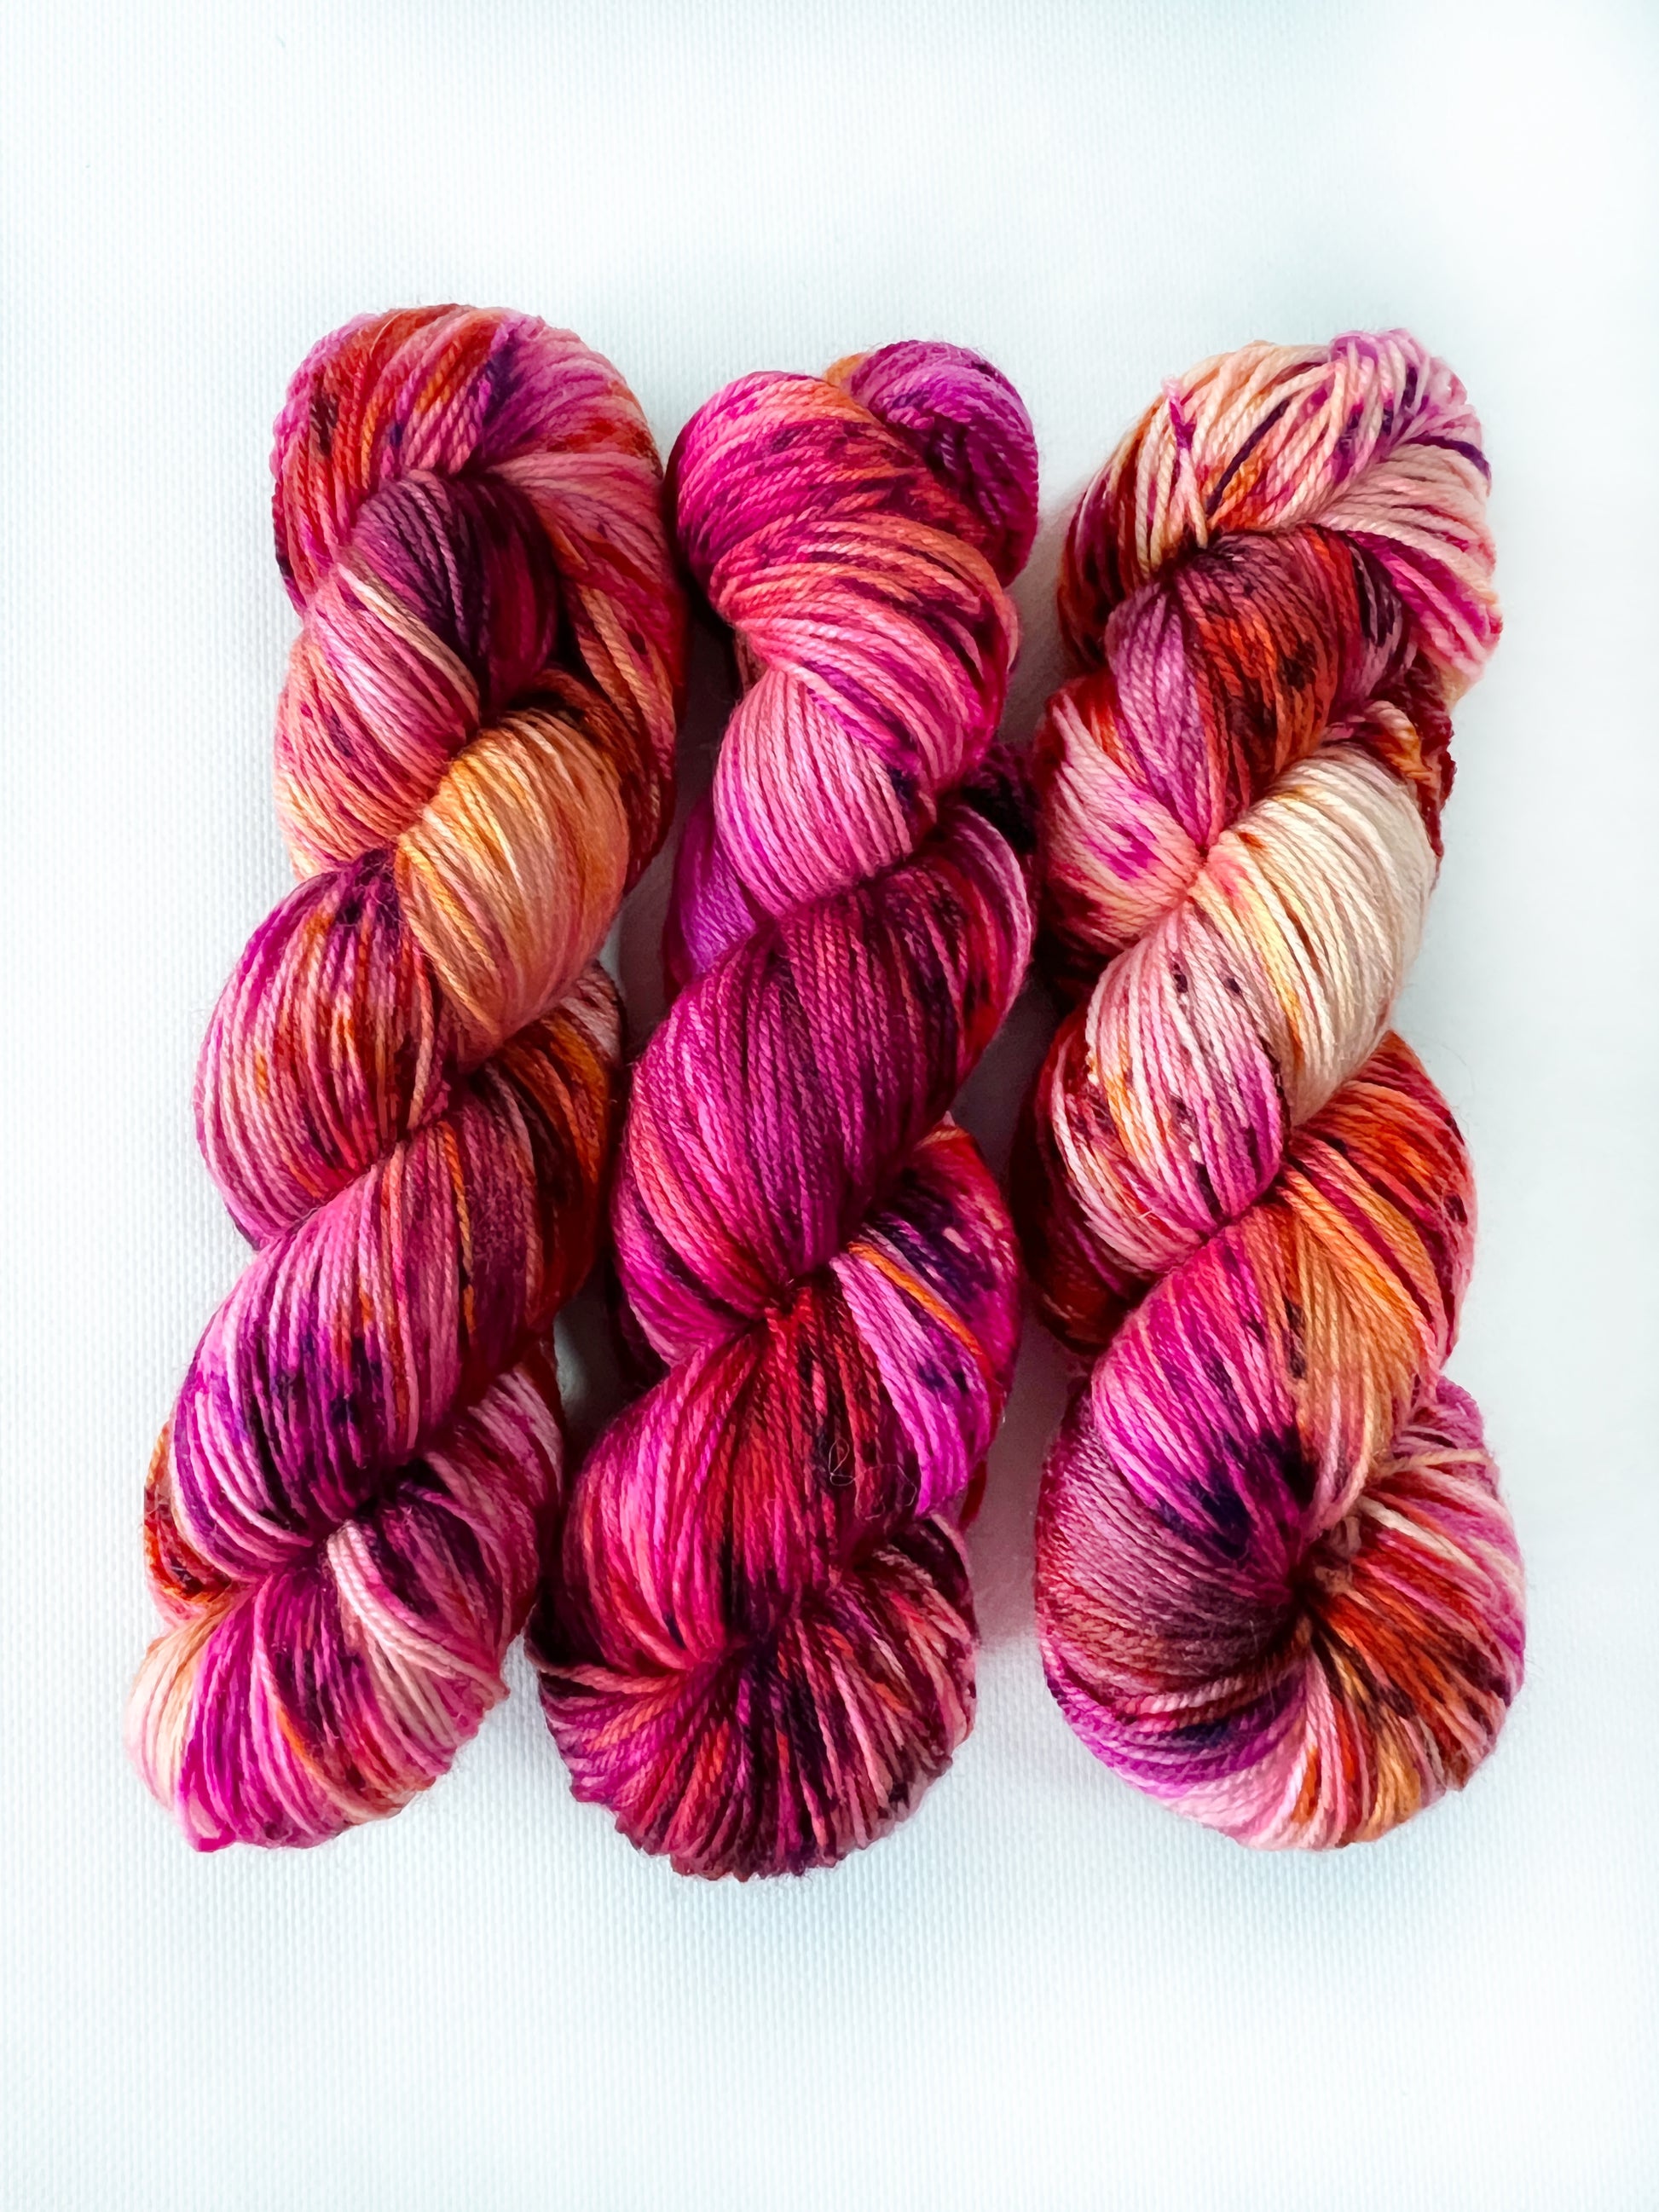 I put a spell on you - Fingering 3 Ply - Okanagan Dye Works